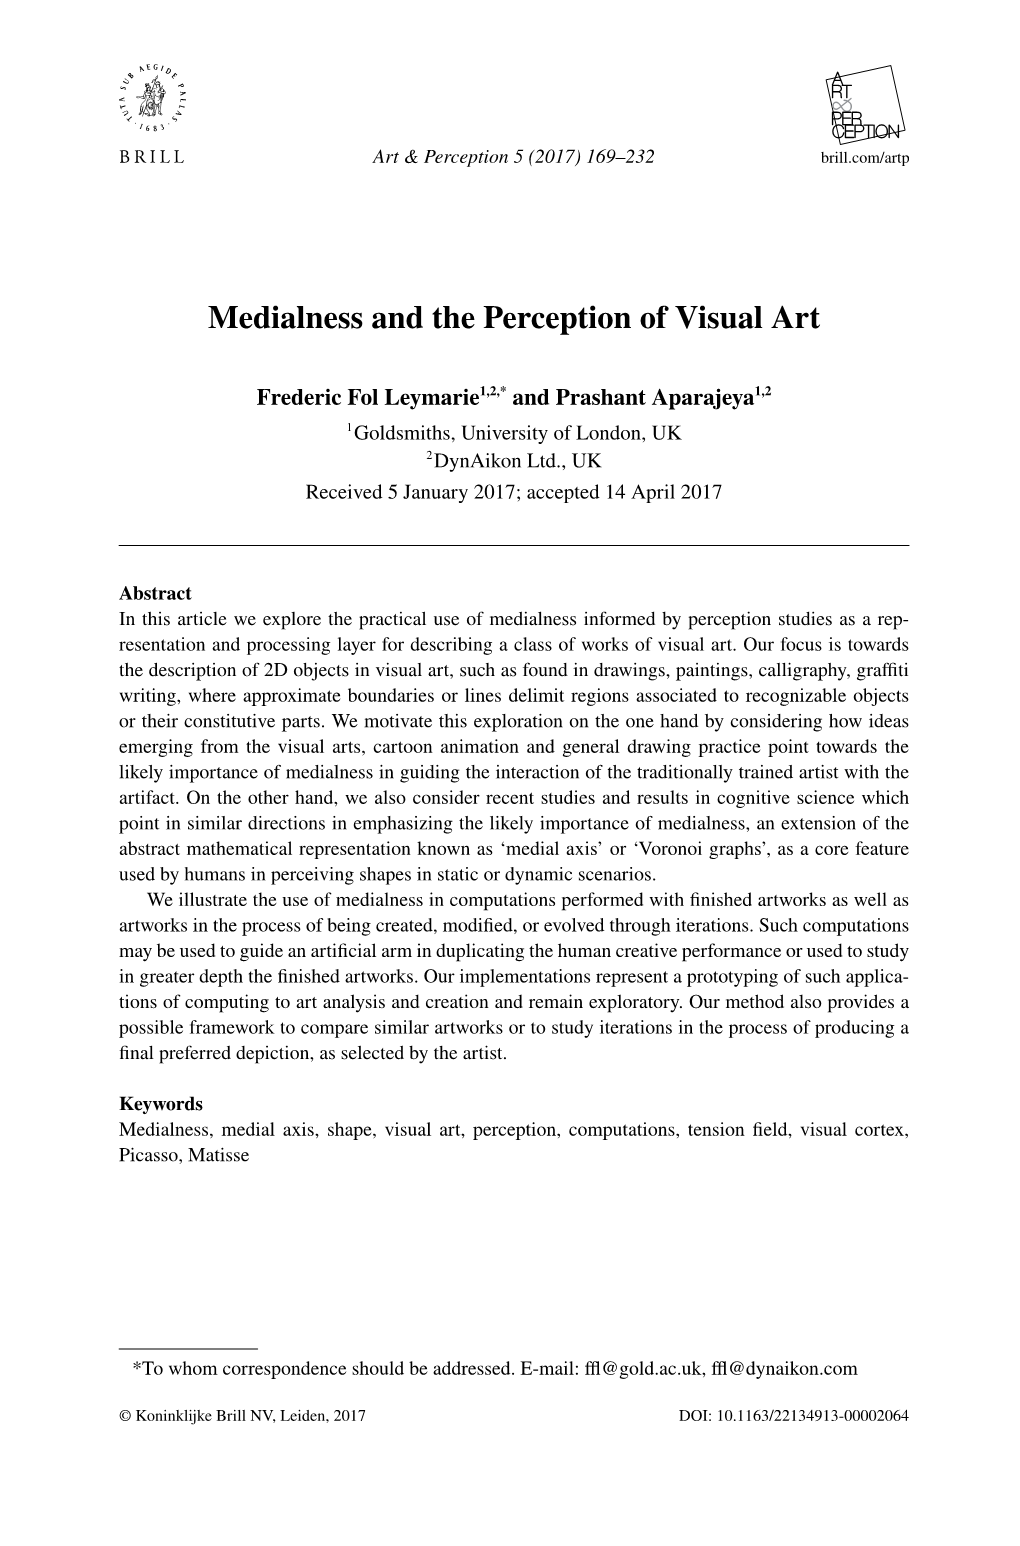 Medialness and the Perception of Visual Art